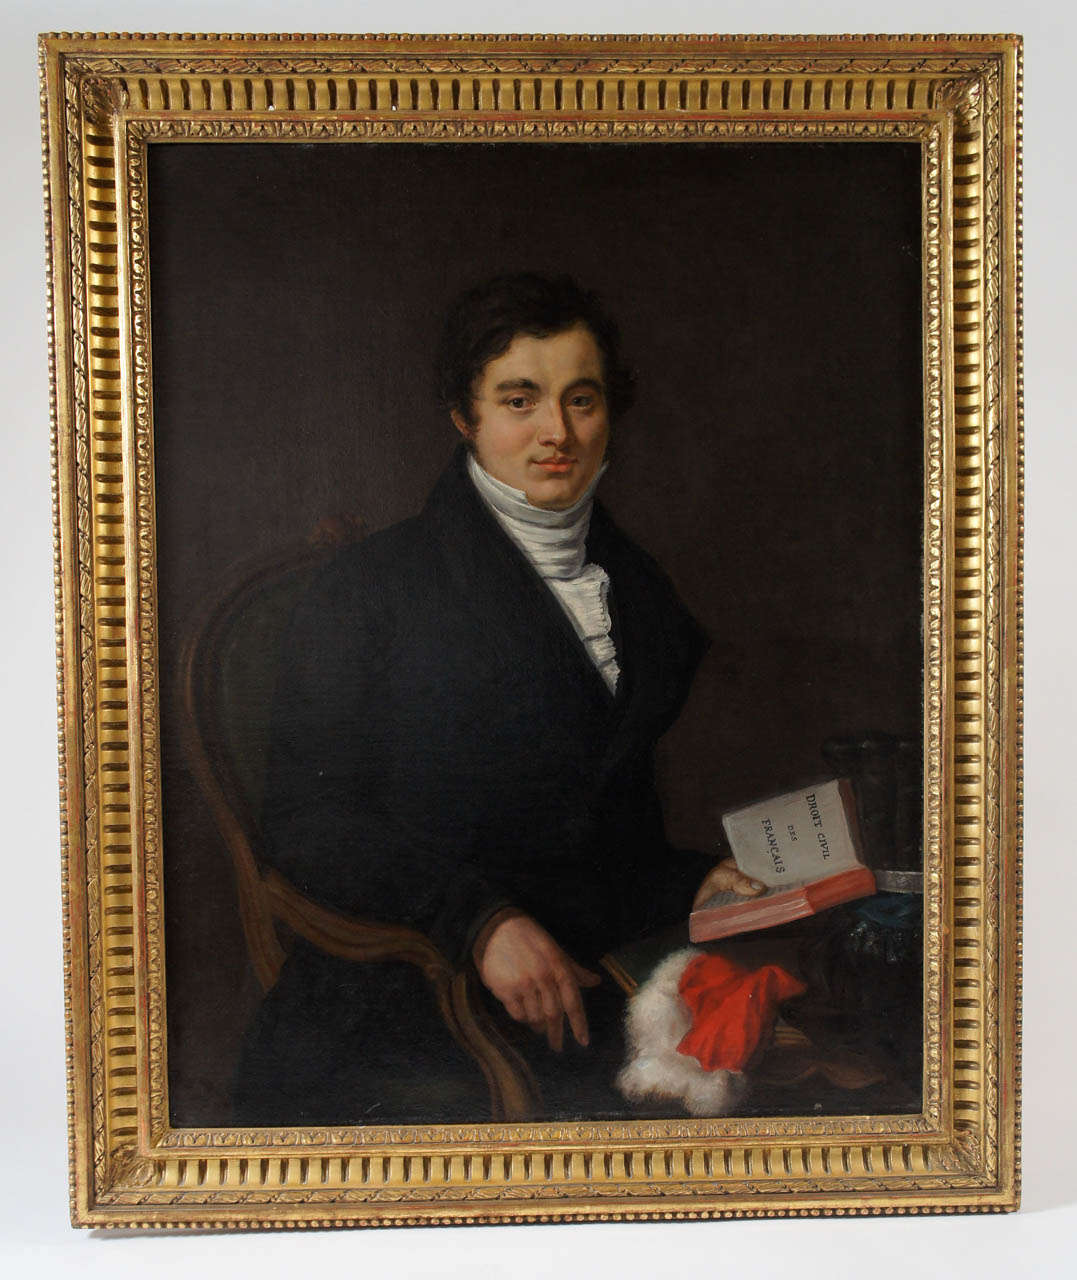 Early 19th century French oil on canvas portrait of a handsome young 'juriste' of the Napoleonic Code shown seated in upholstered Louis XV style chair at table with feathered cap and fur-trimmed gown in three-quarter profile pose holding an open